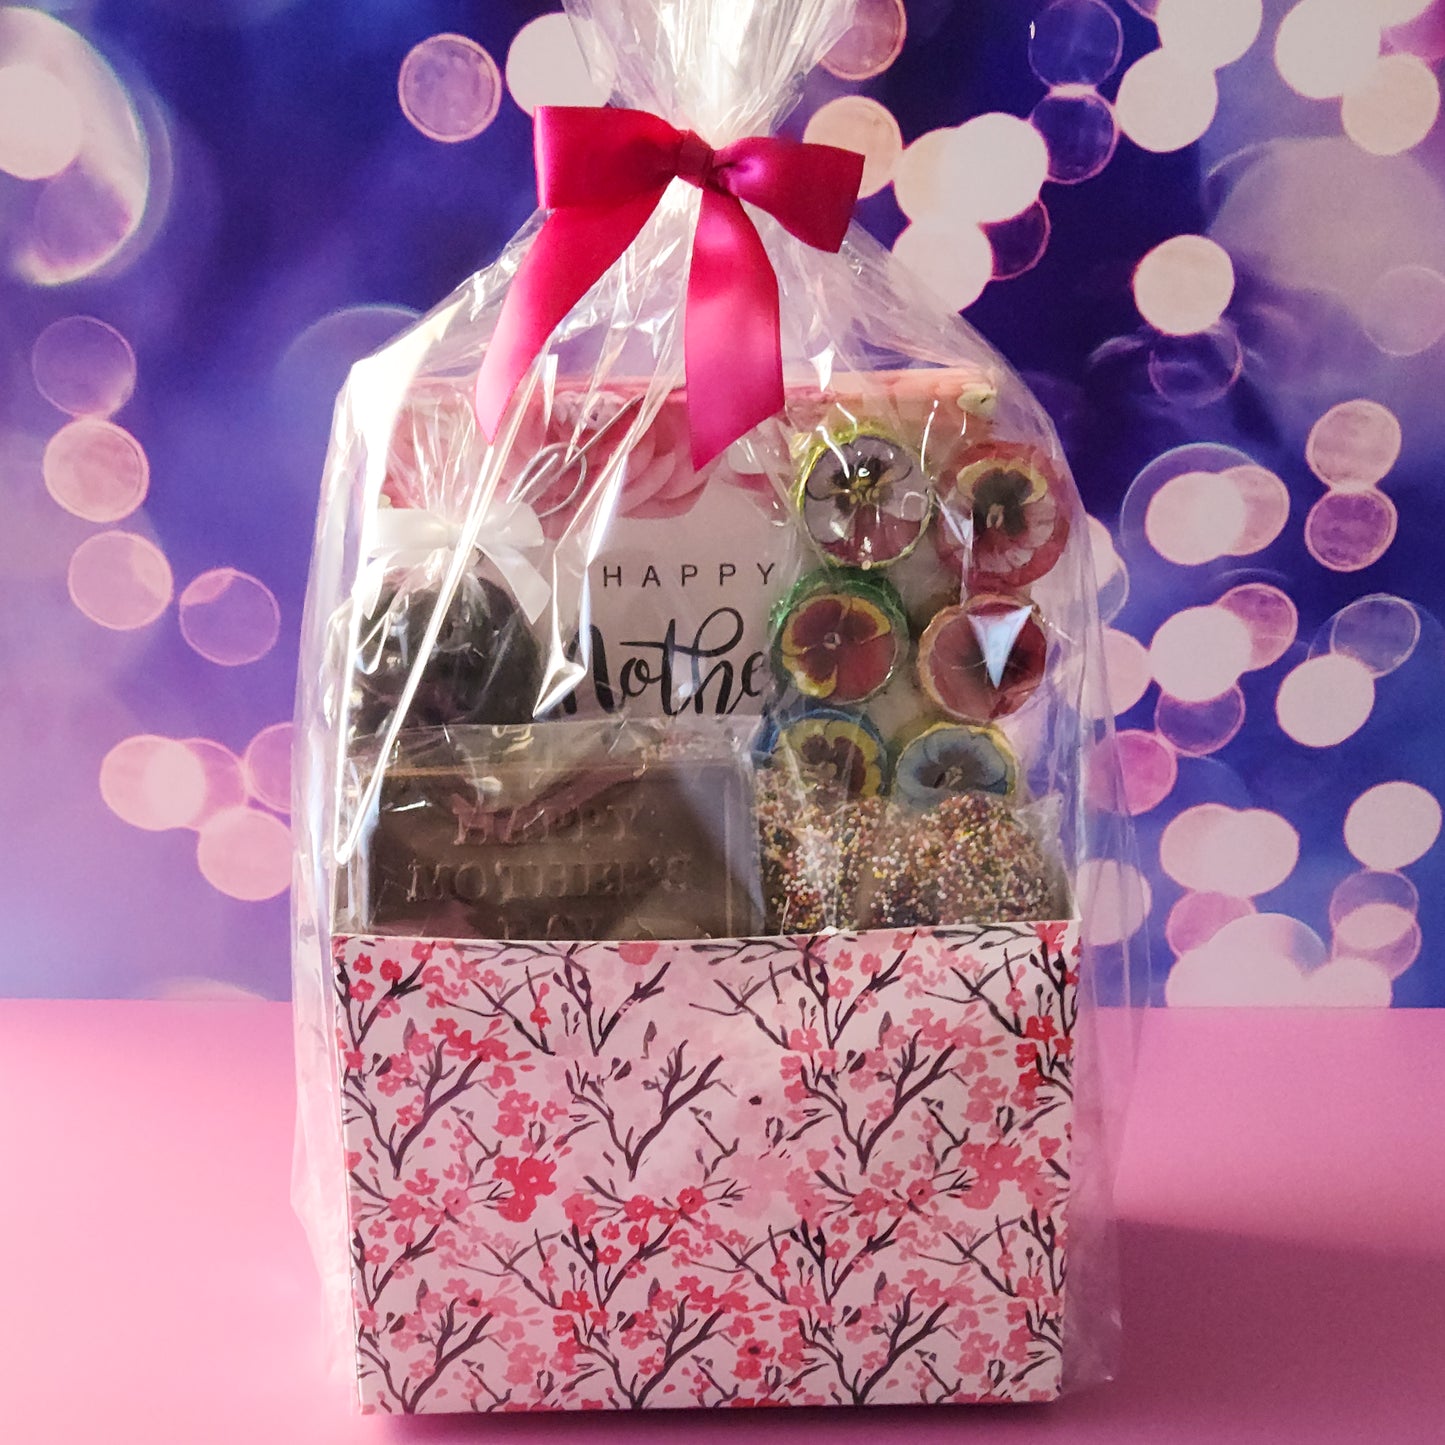 The perfect gift for mom. This basket is filled with all of mom's favorite candy!